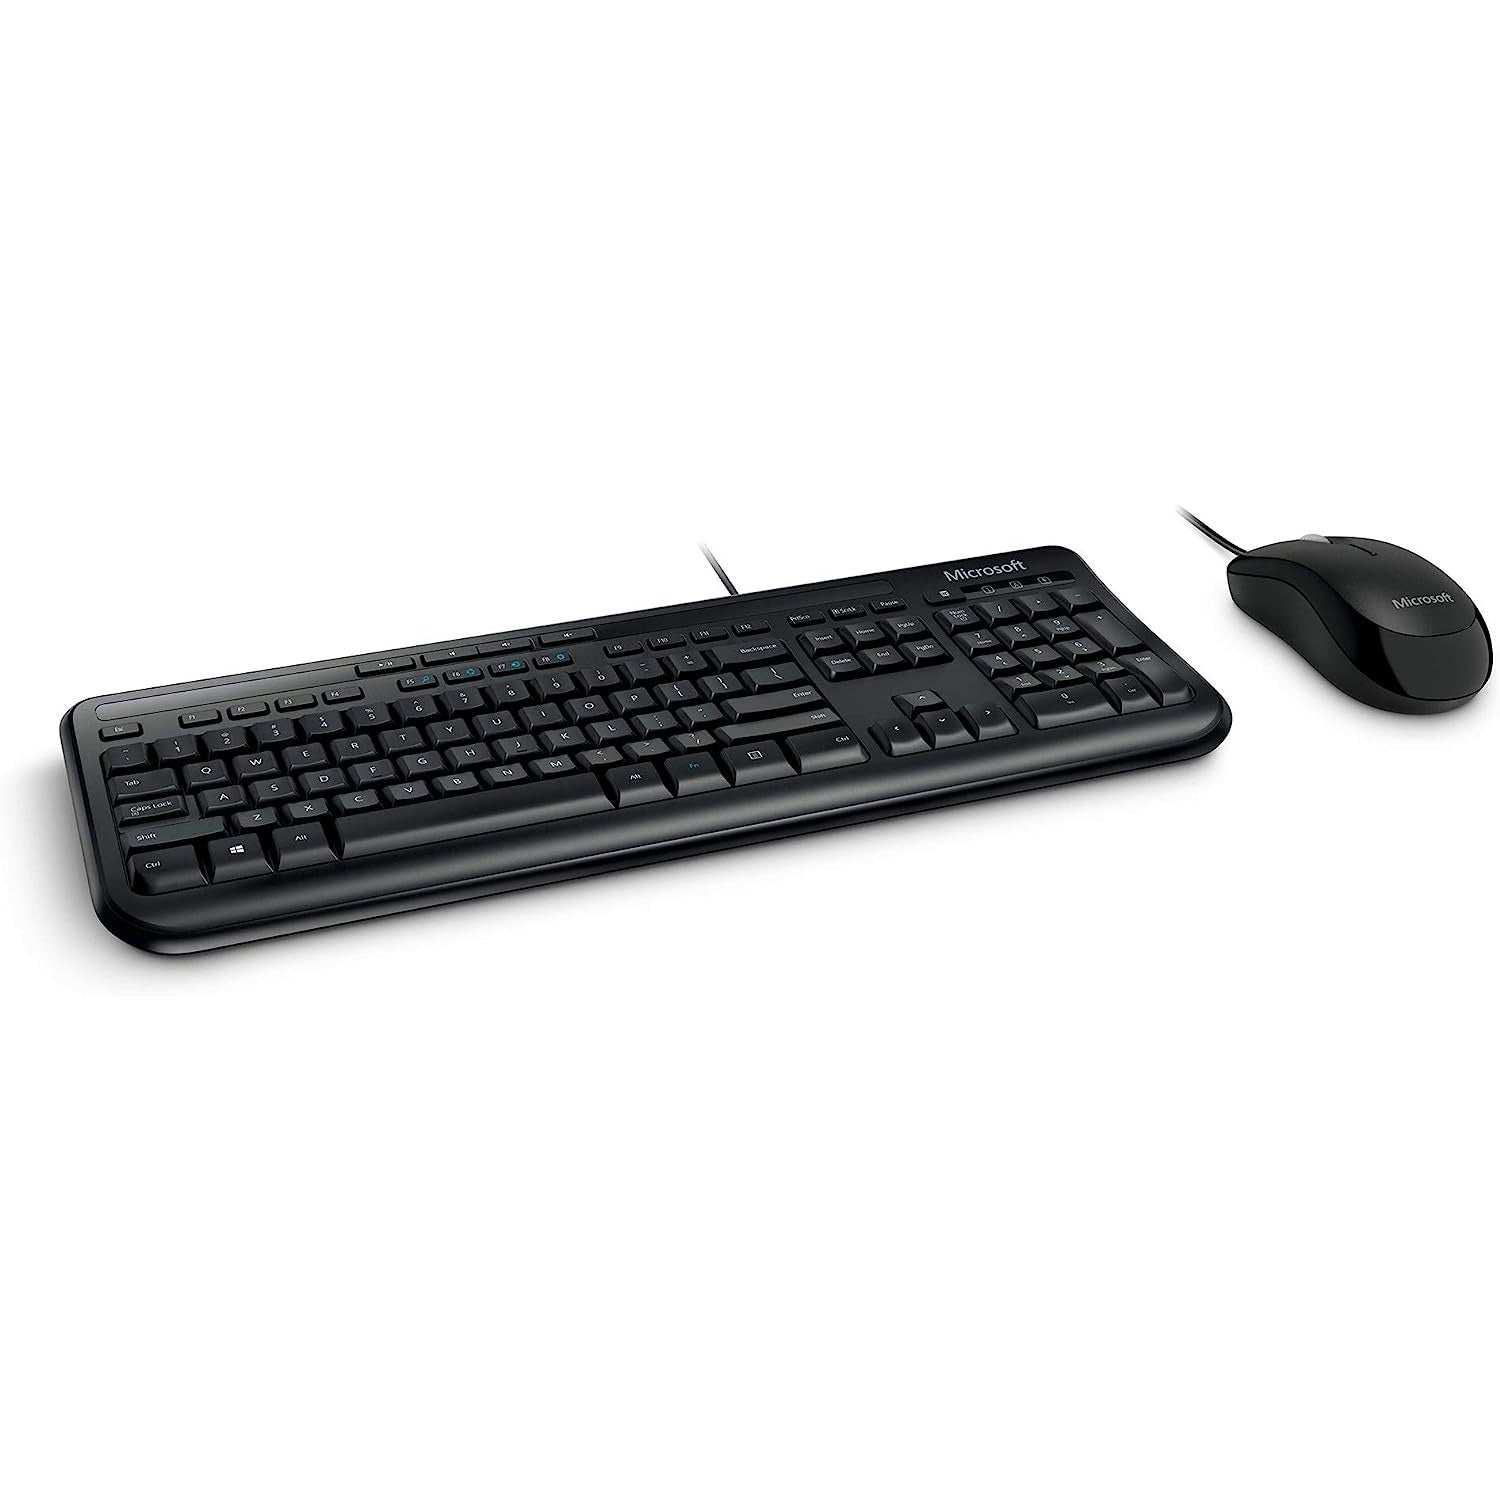 Microsoft Wired Desktop 600 Keyboard & Mouse combo - USB Cable - Optical Mouse - Compatible with Desktop Computer - PC, Windows (3J2-00022)